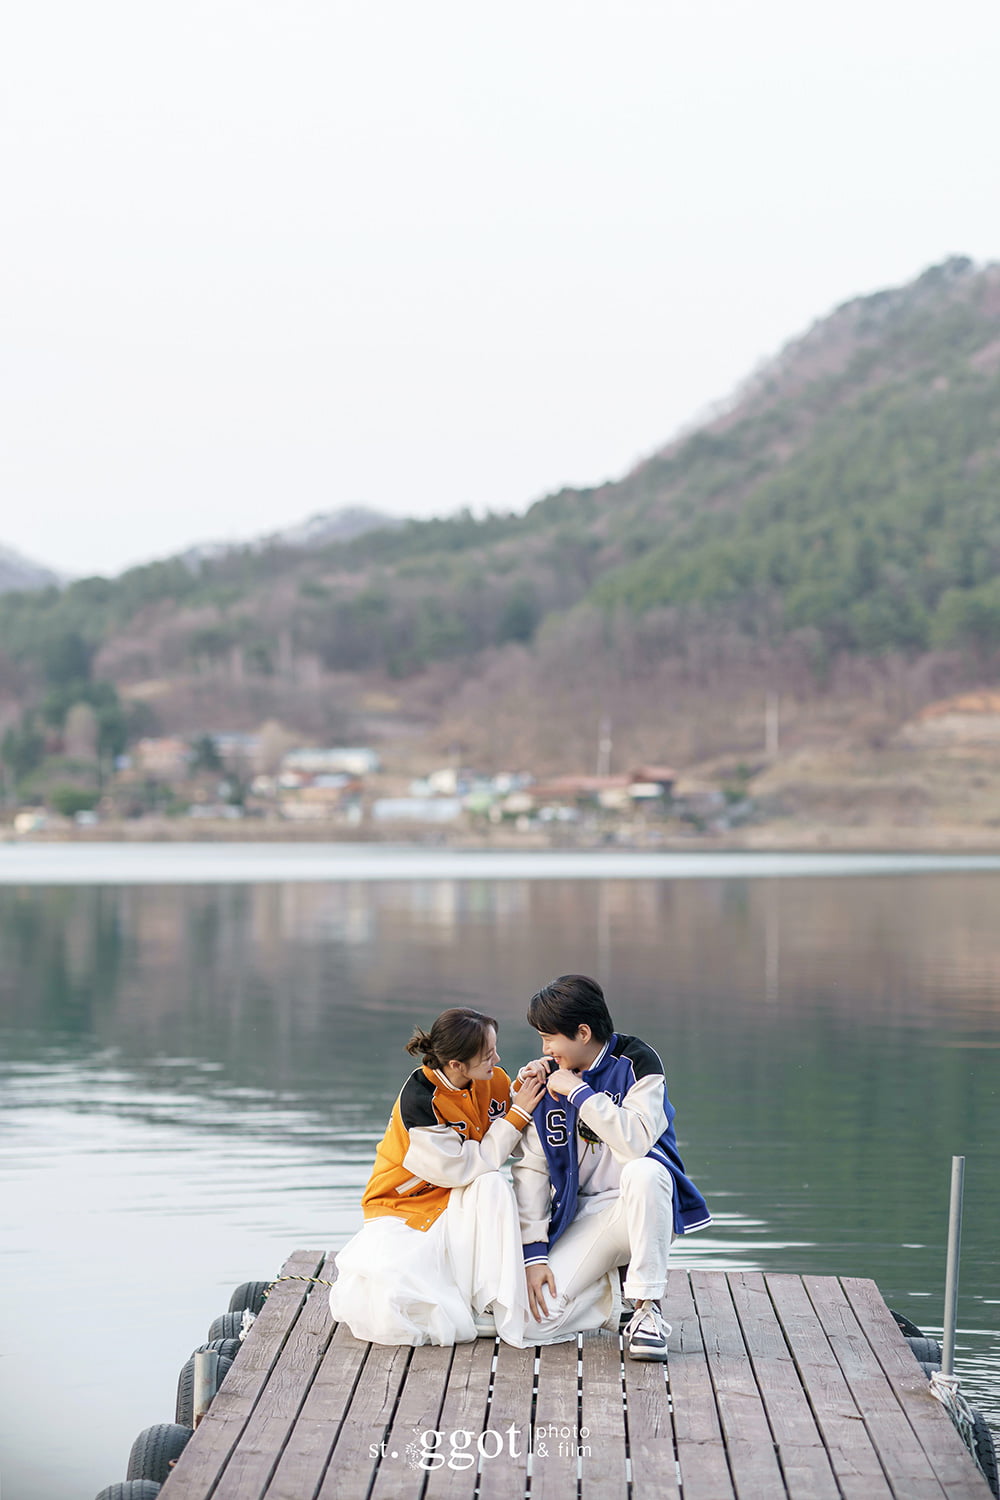 'Moon Ji-in♥' Kim Gi-ri, 'disappointed' by bride-centered wedding photography